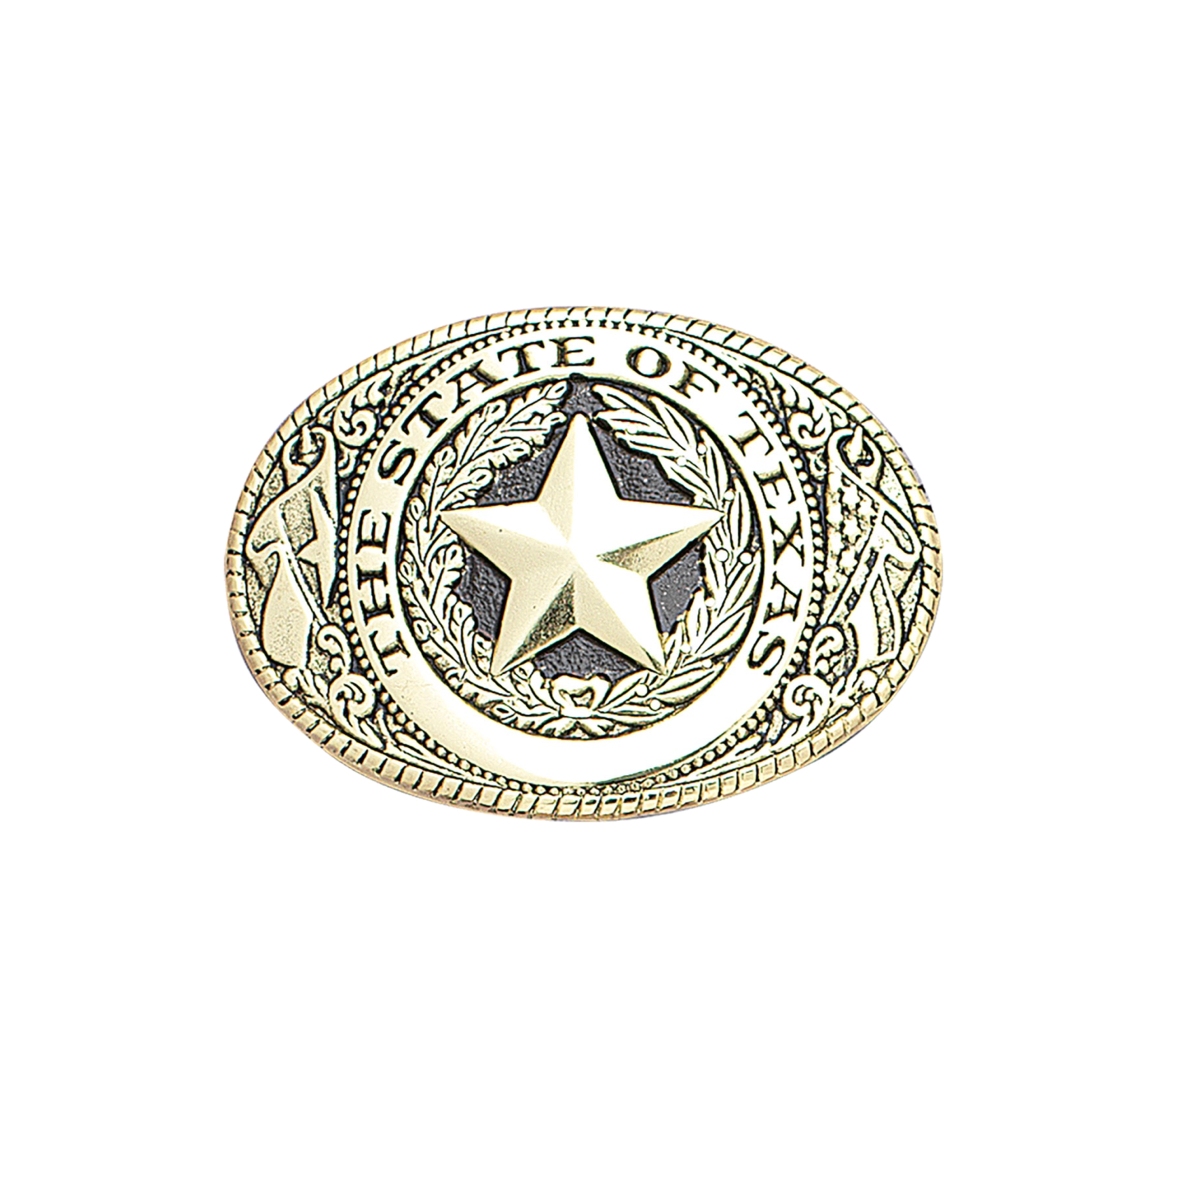 MF-37006 Belt Buckle The State of Texas Black and Gold